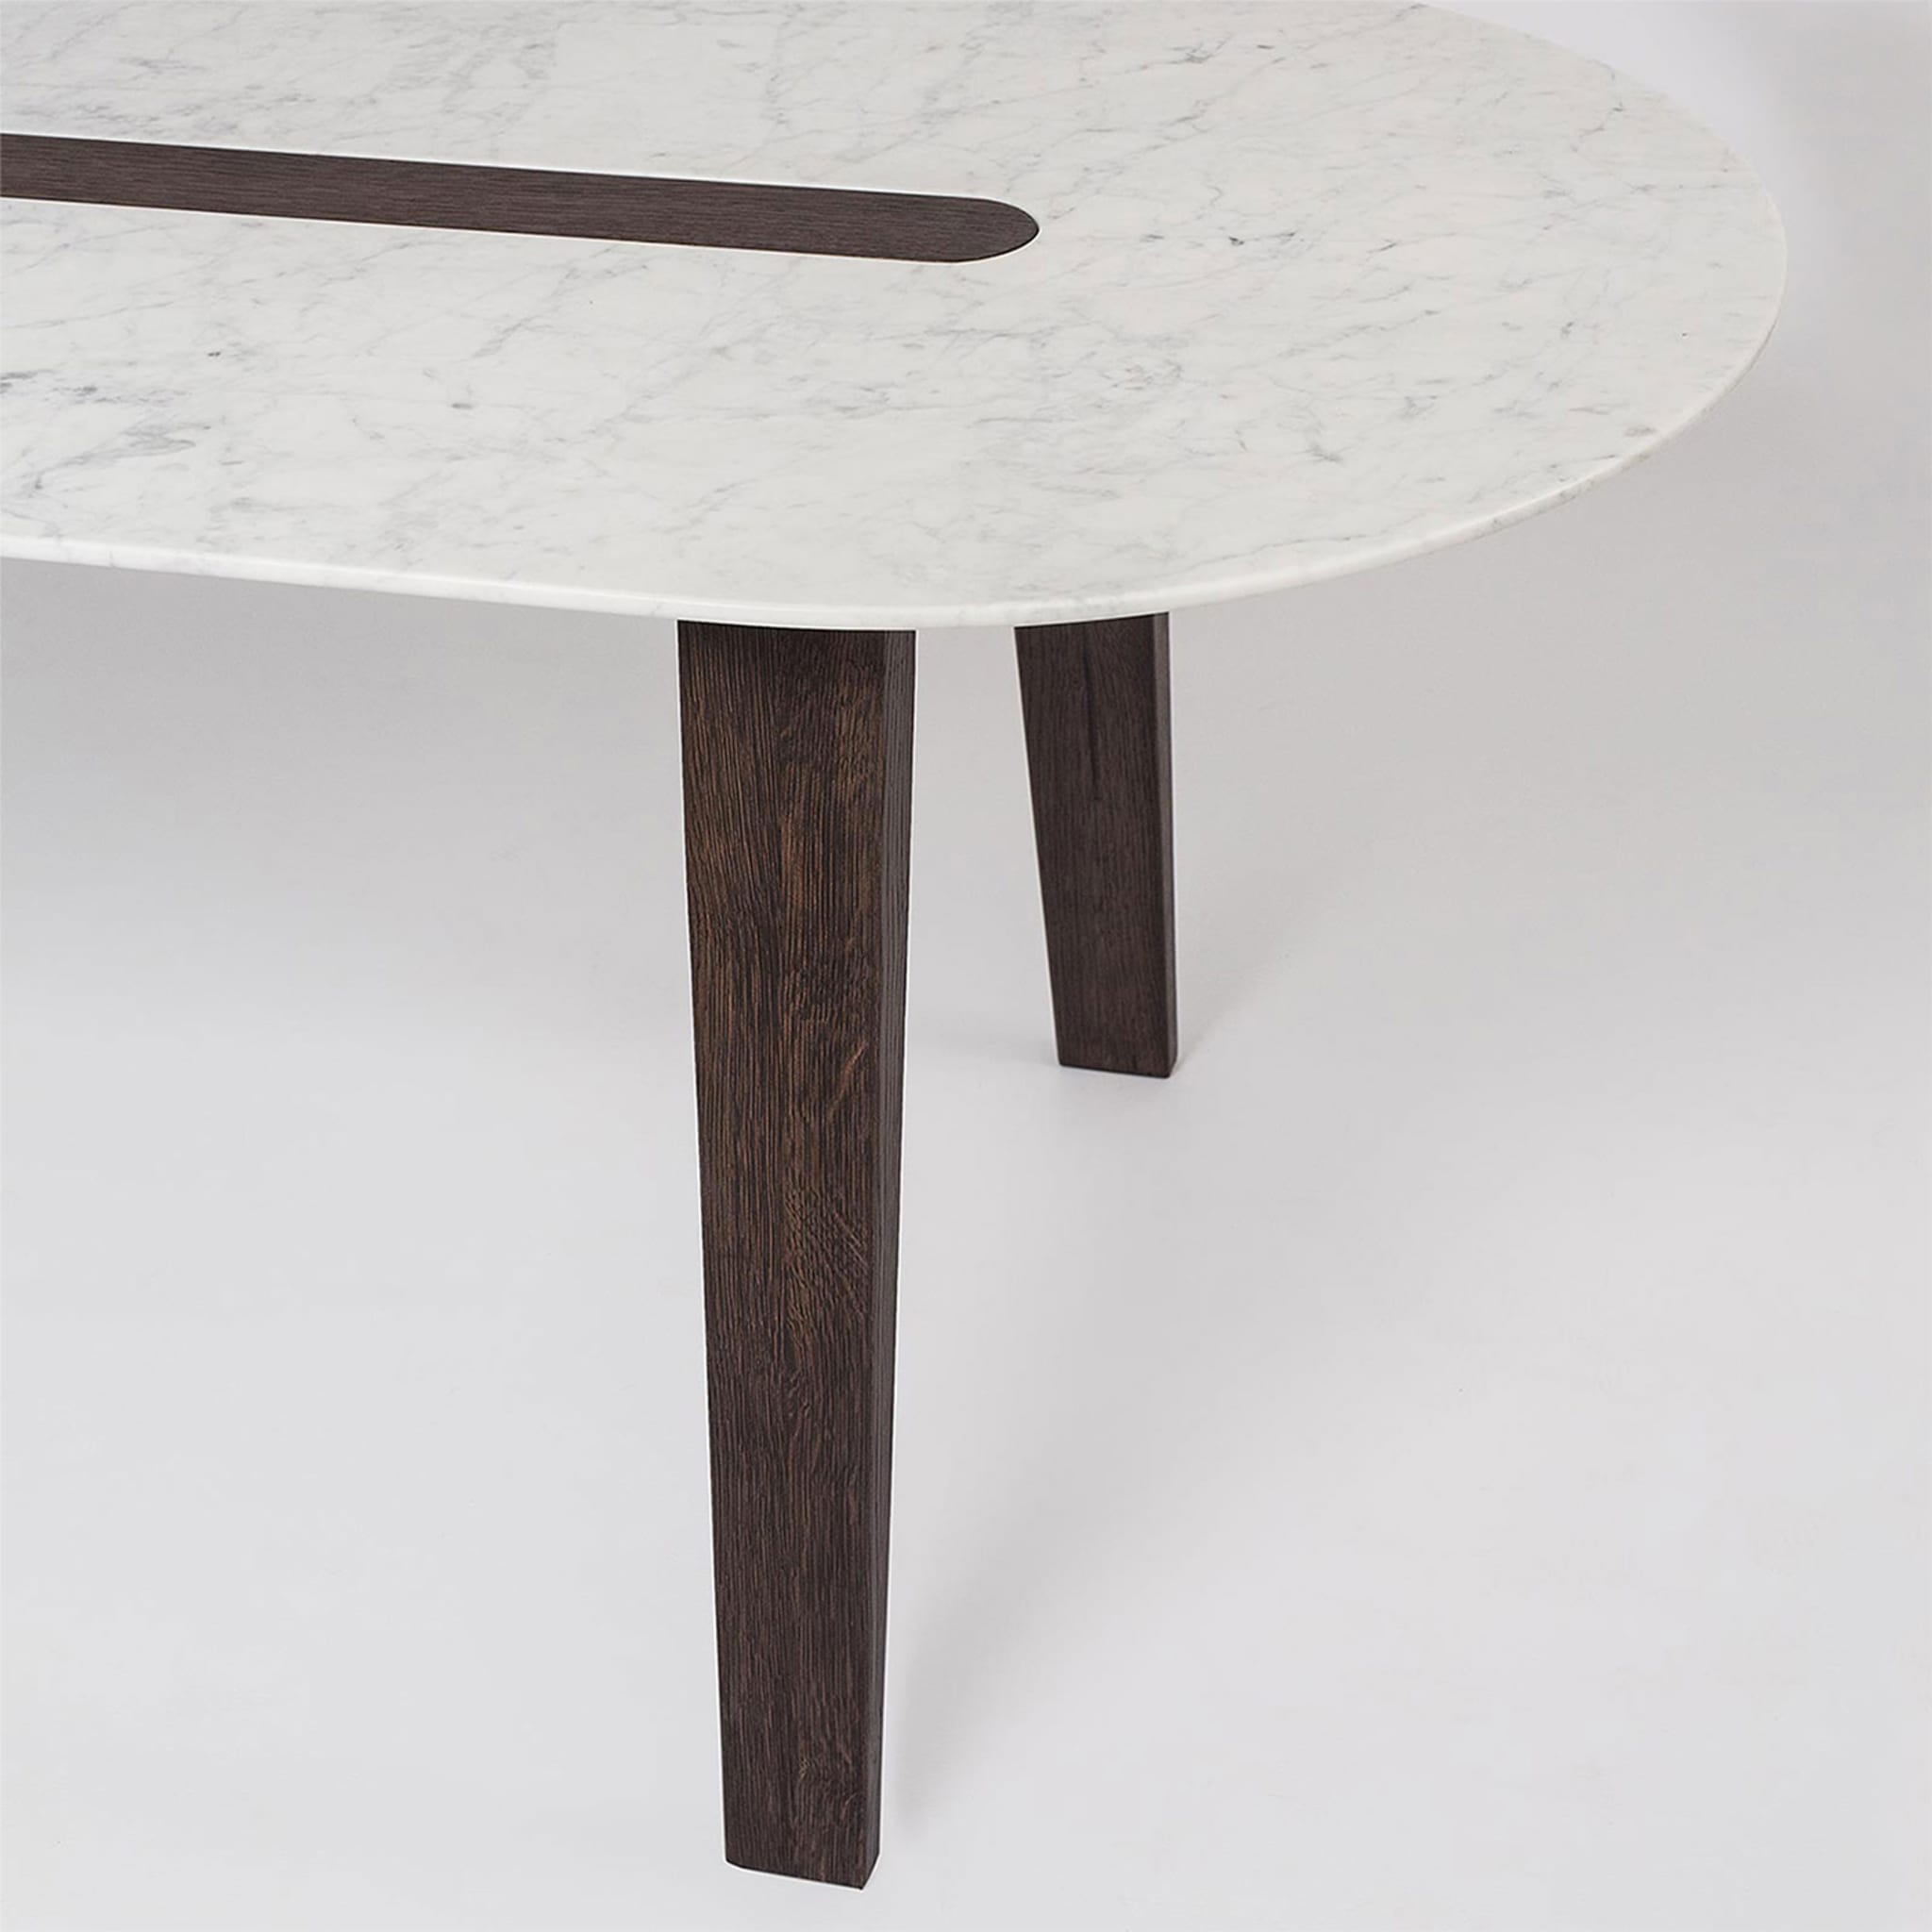 Maximus Dining Table by Emmanuel Gallina - Alternative view 1